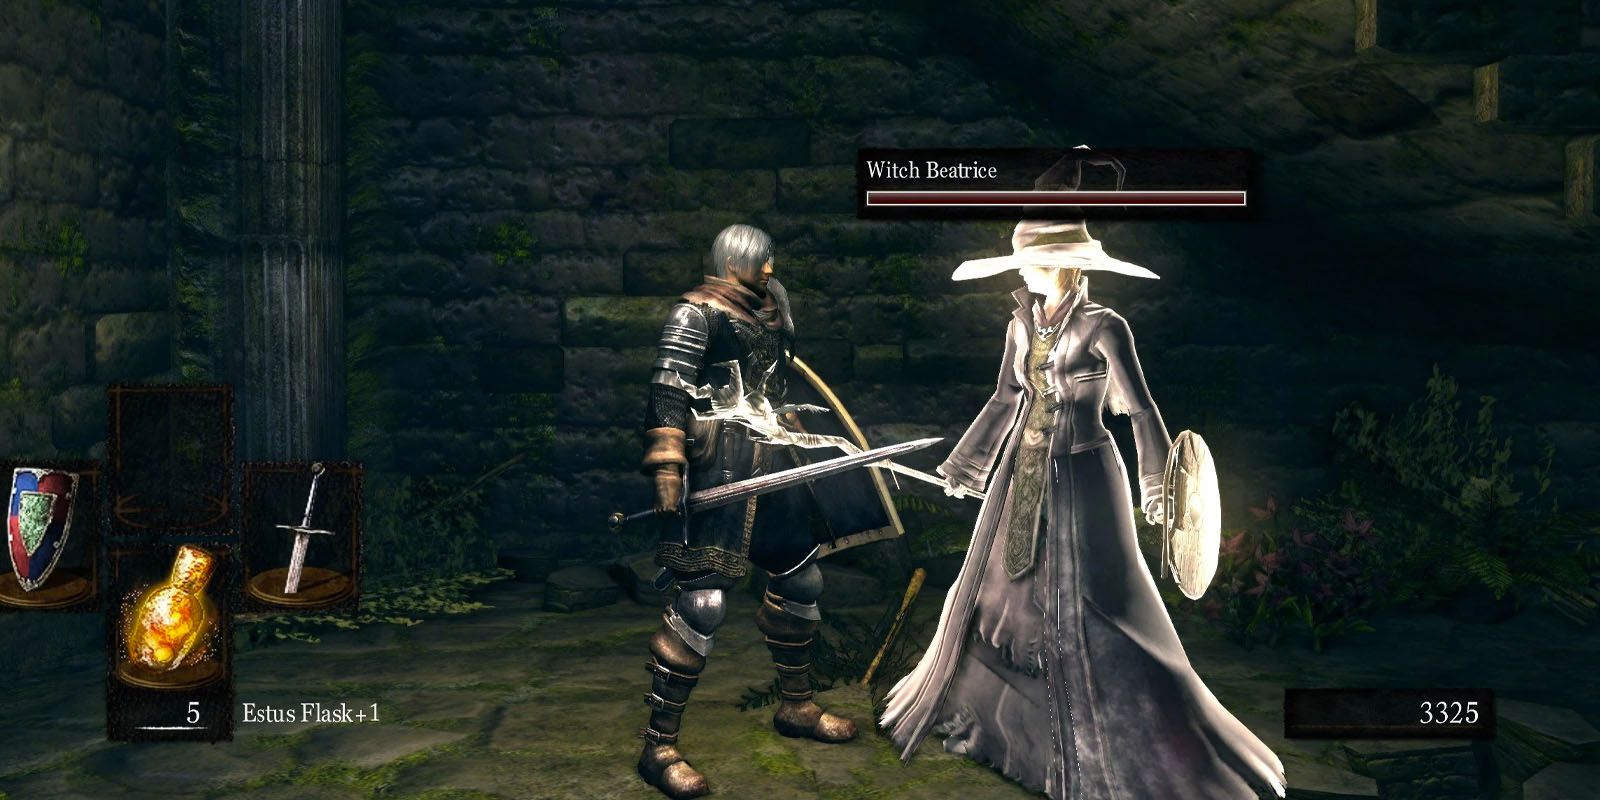 The Witch Beatrice in Dark Souls